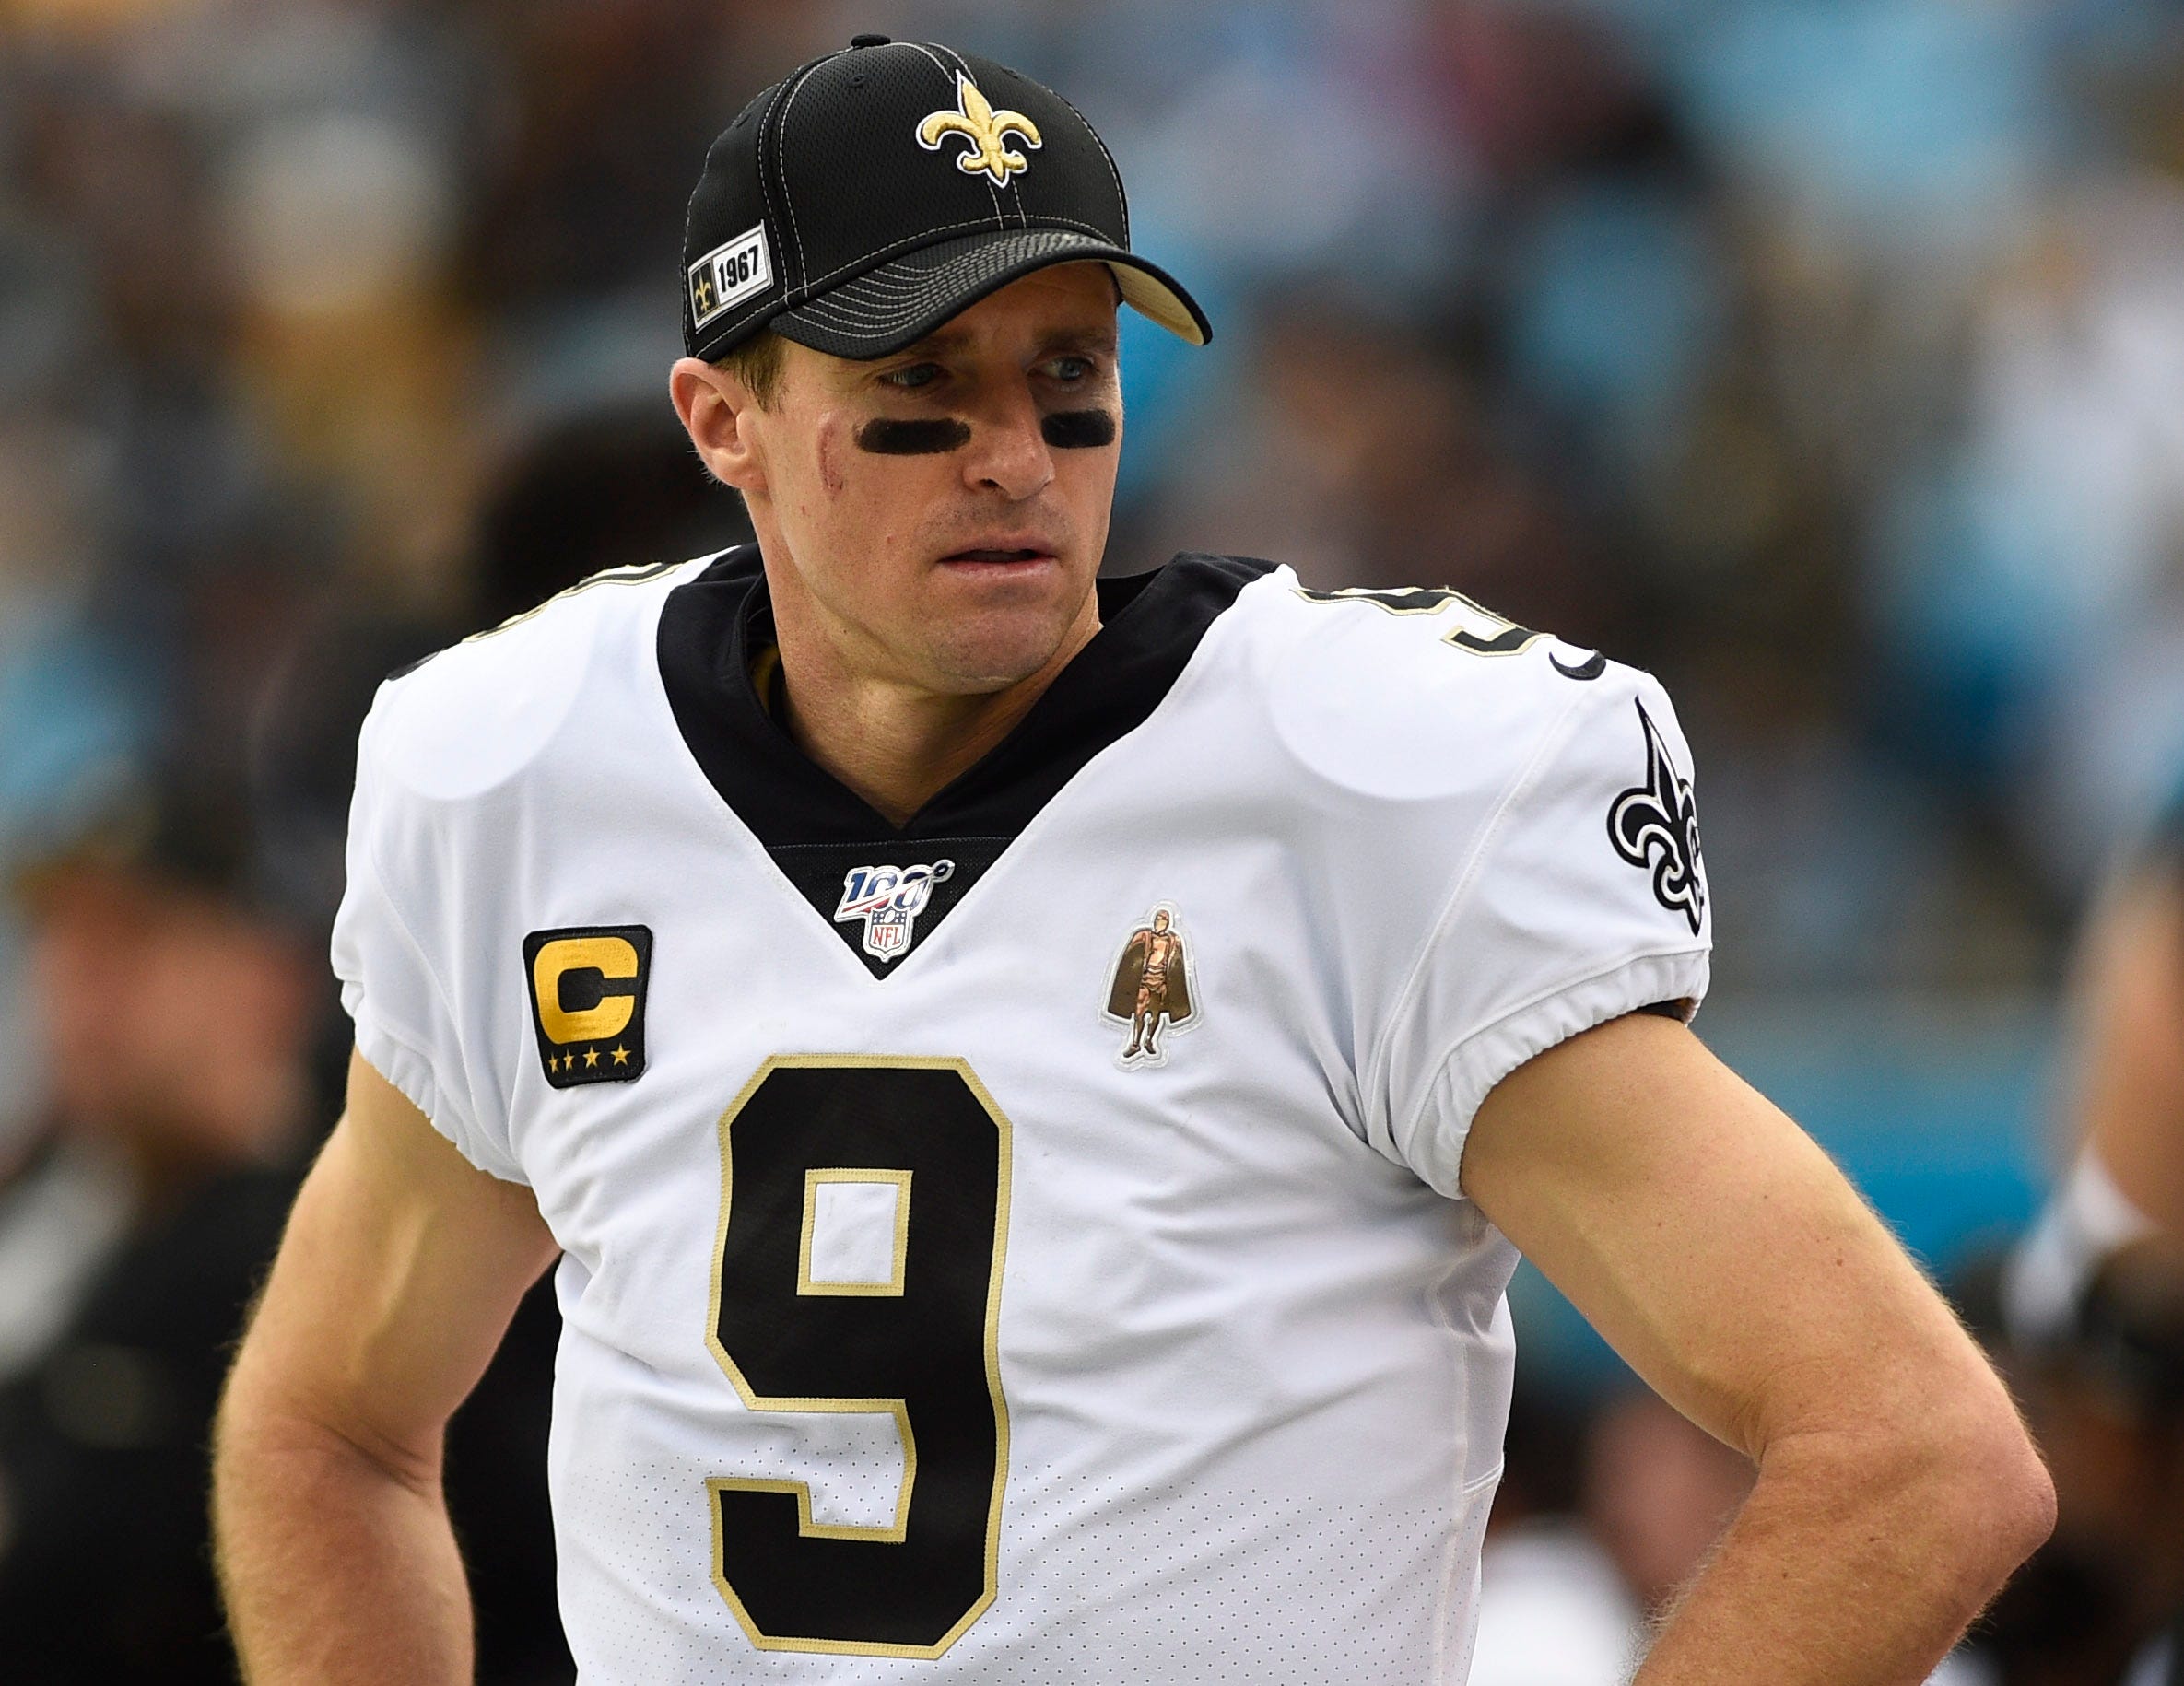 New Orleans Saints’ Drew Brees consents to decrease salary in sign of retirement